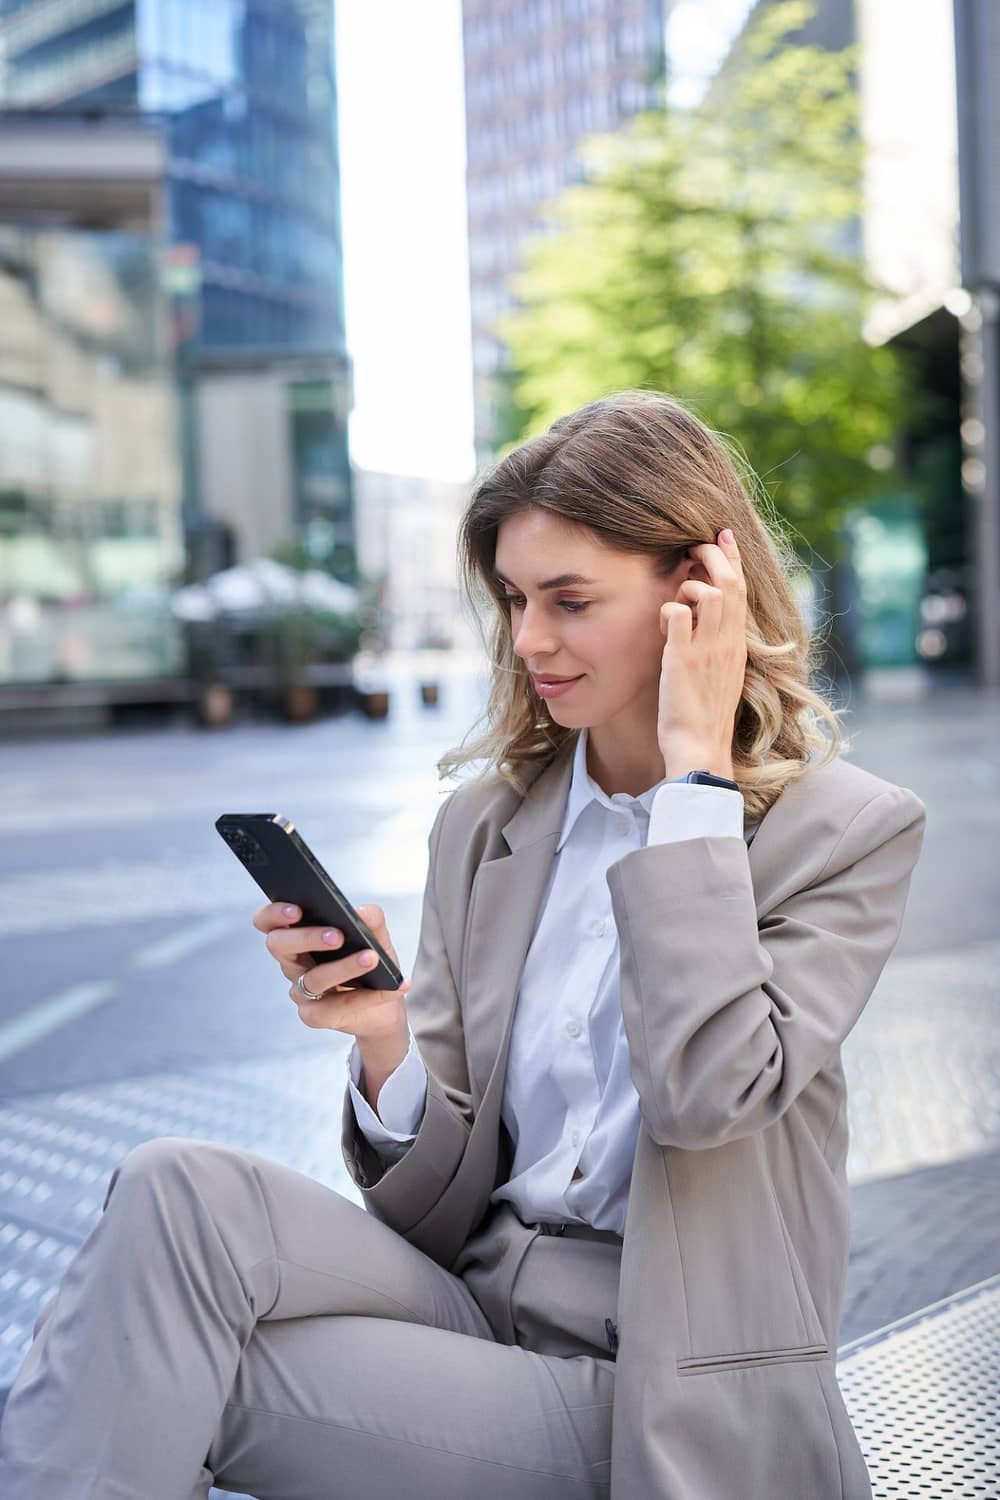 Vertical portrait of woman in suit using mobile phone, reading message or checking app, posing